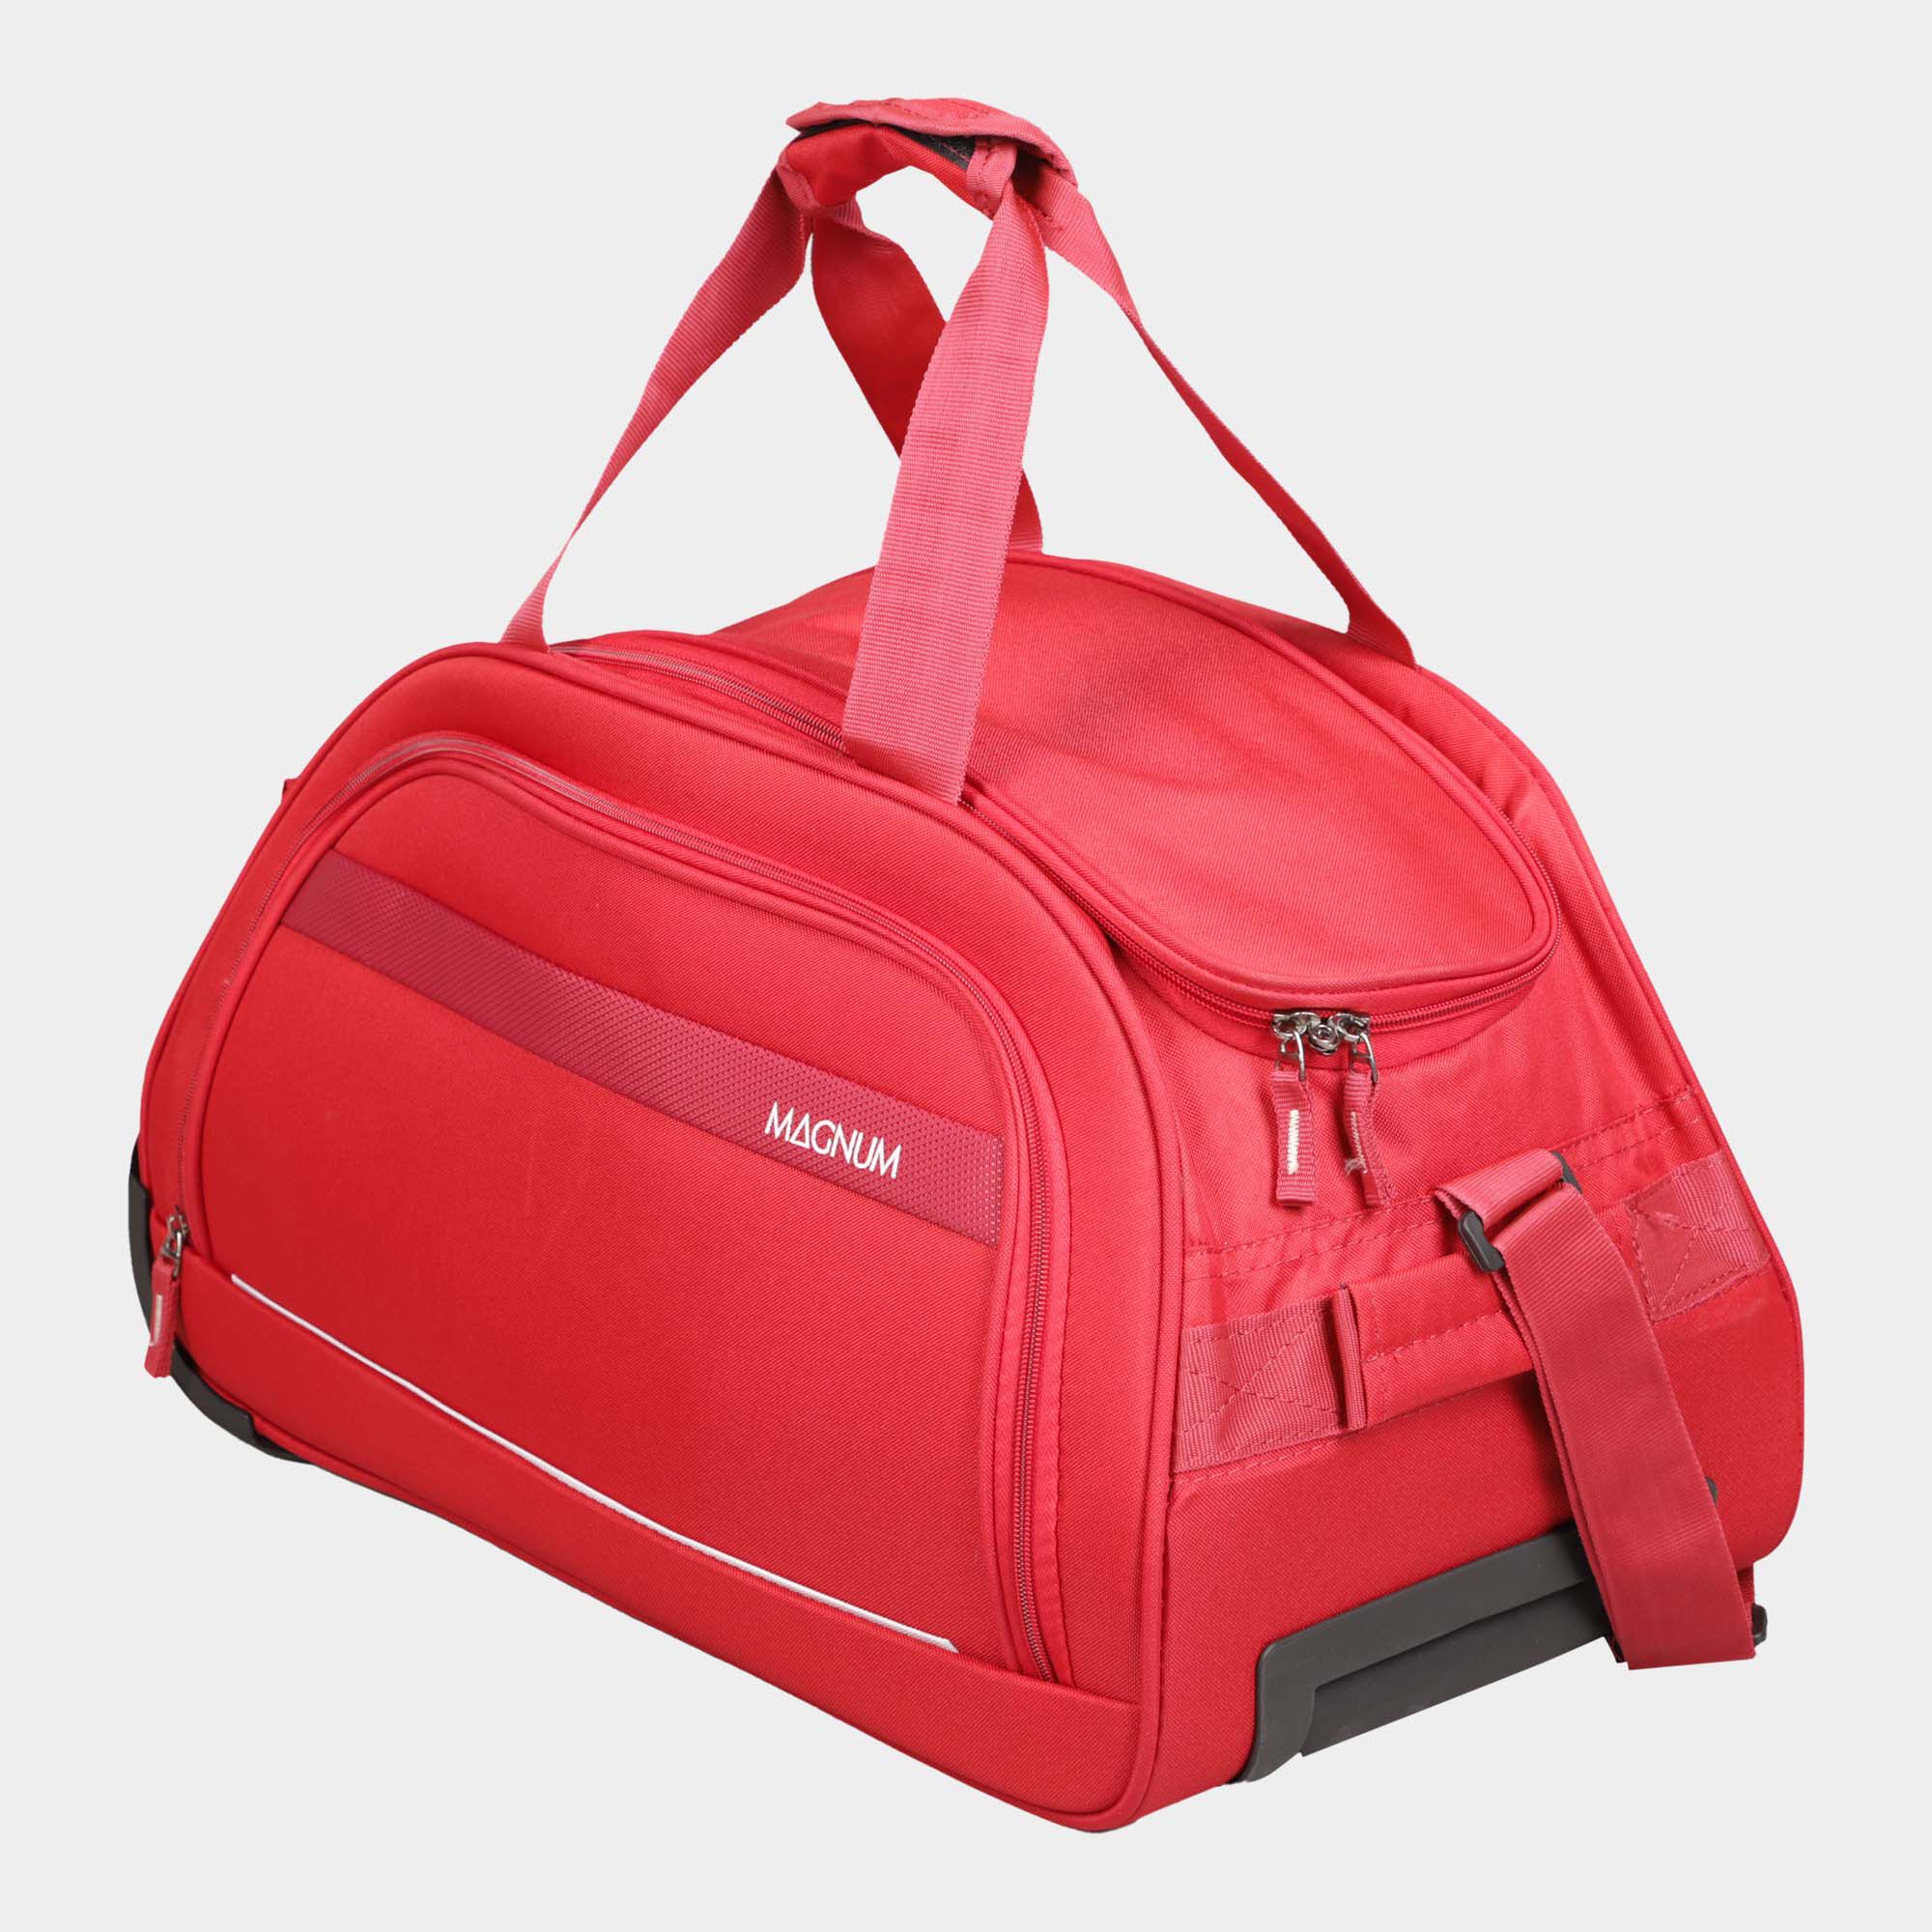 Buy Safari Magnum Polyester Luggage Bag 55CM Online @ ₹3599 from ShopClues